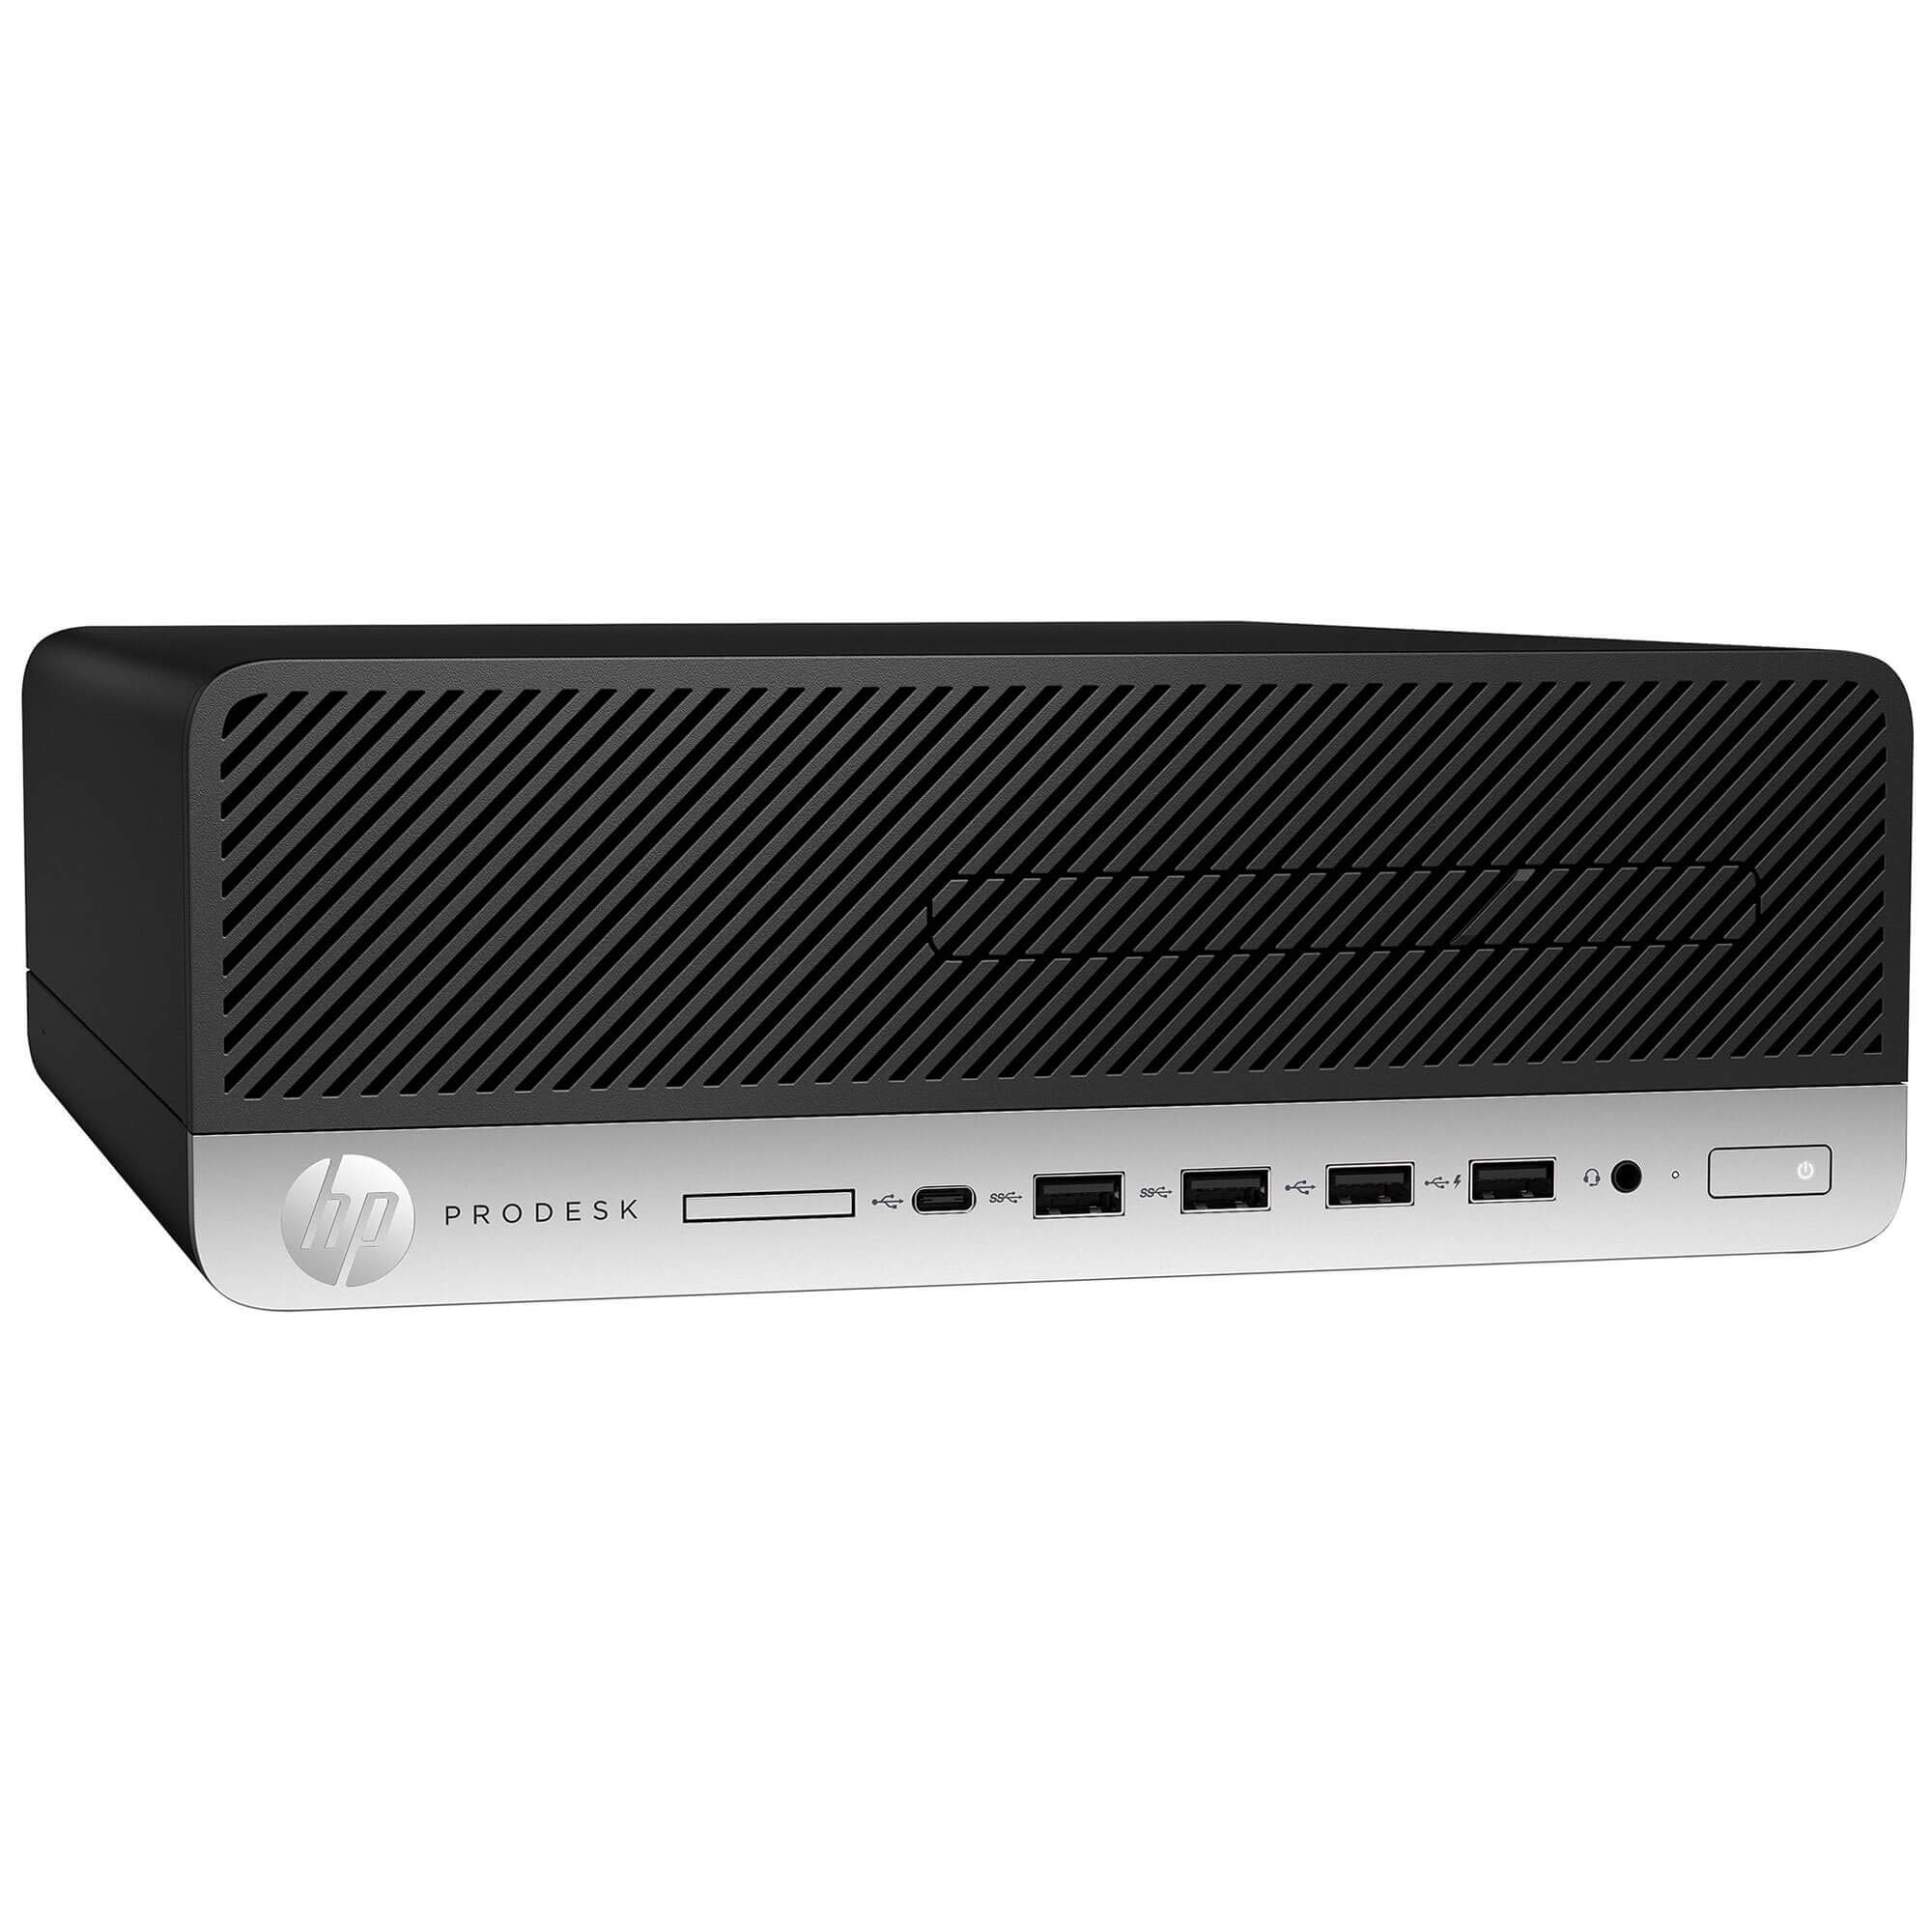 HP ProDesk 7th Generation Desktop Computer | Quad Core Intel i5 (3.2) | 32GB DDR4 RAM | 1TB SSD Solid State | Windows 10 Professional | Home or Office PC (Renewed)